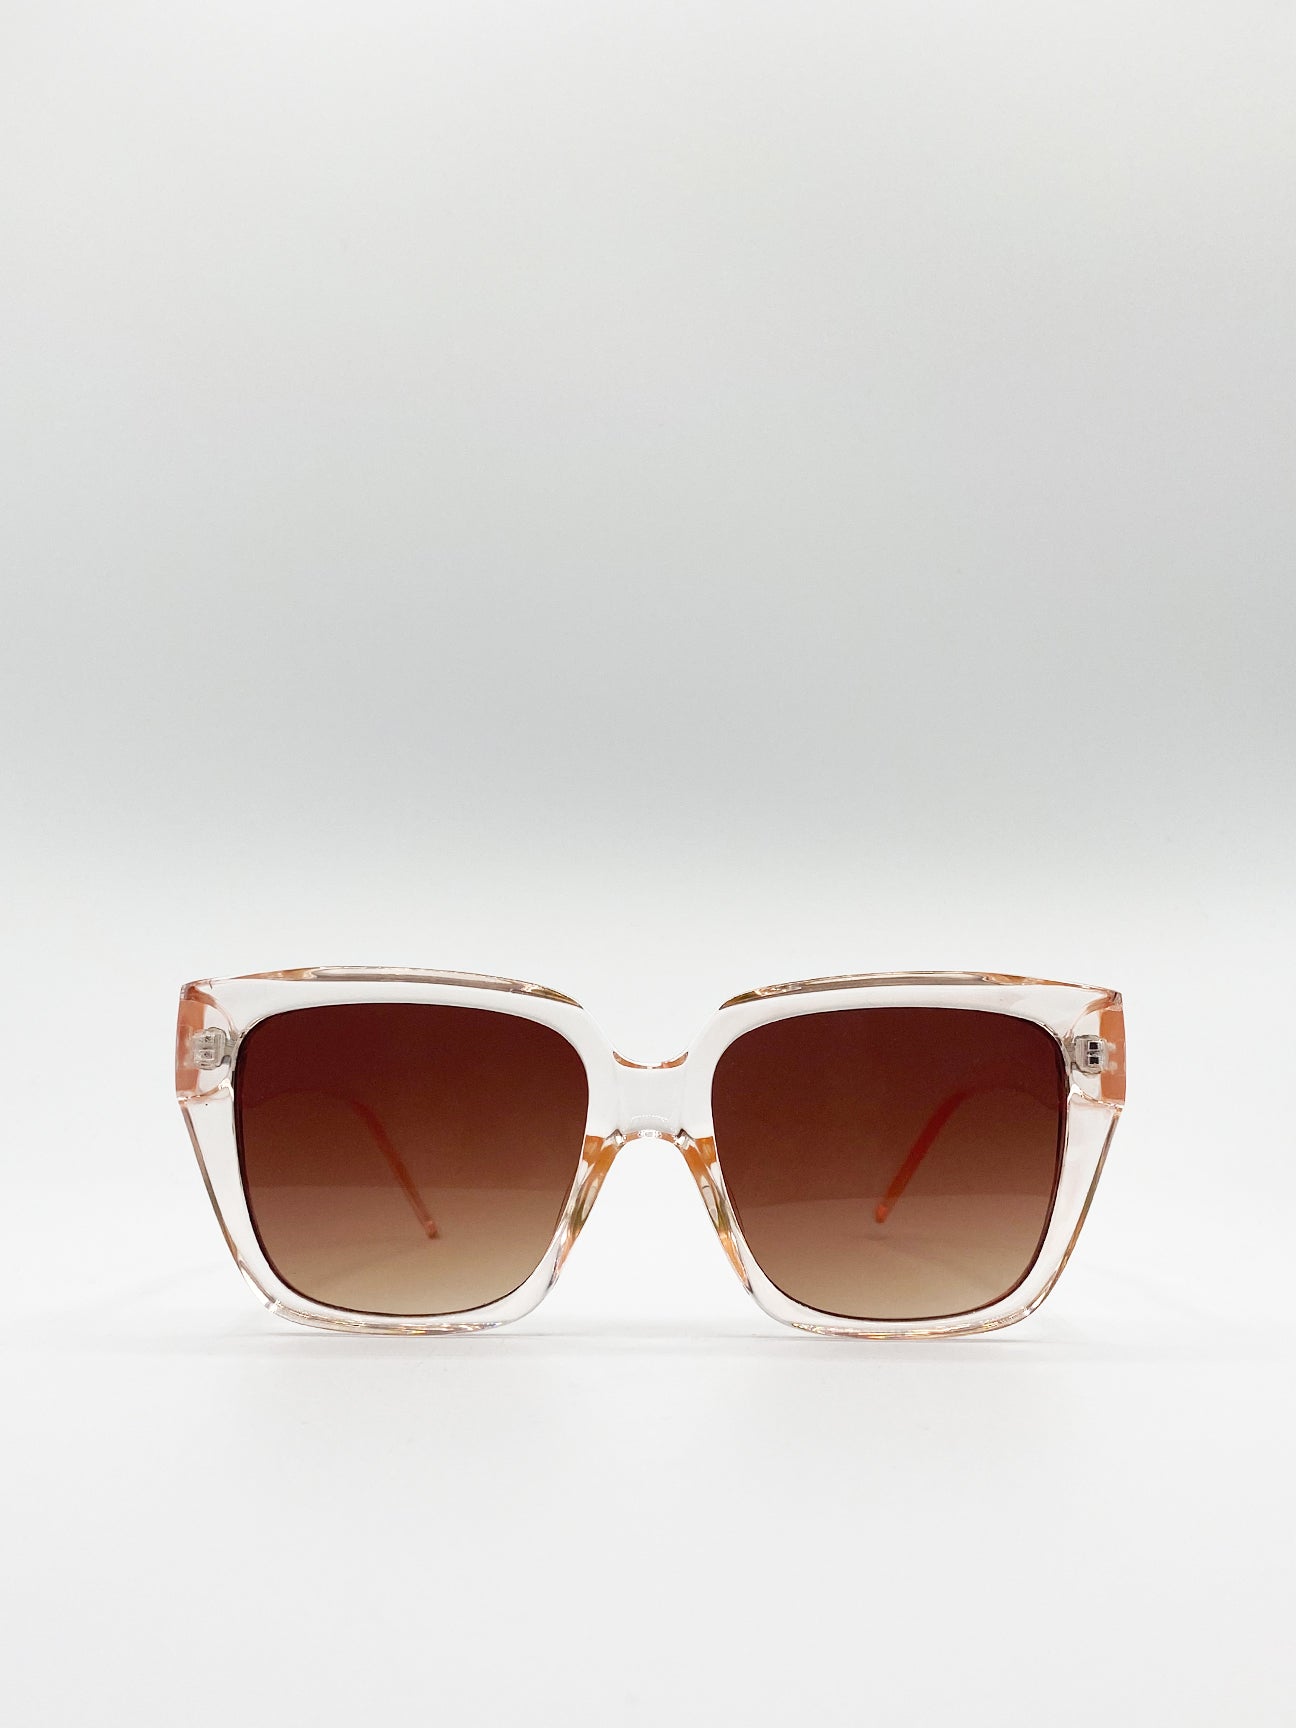 Crystal Peach Oversized Cat Eye Sunglasses with Brown Grad Lenses